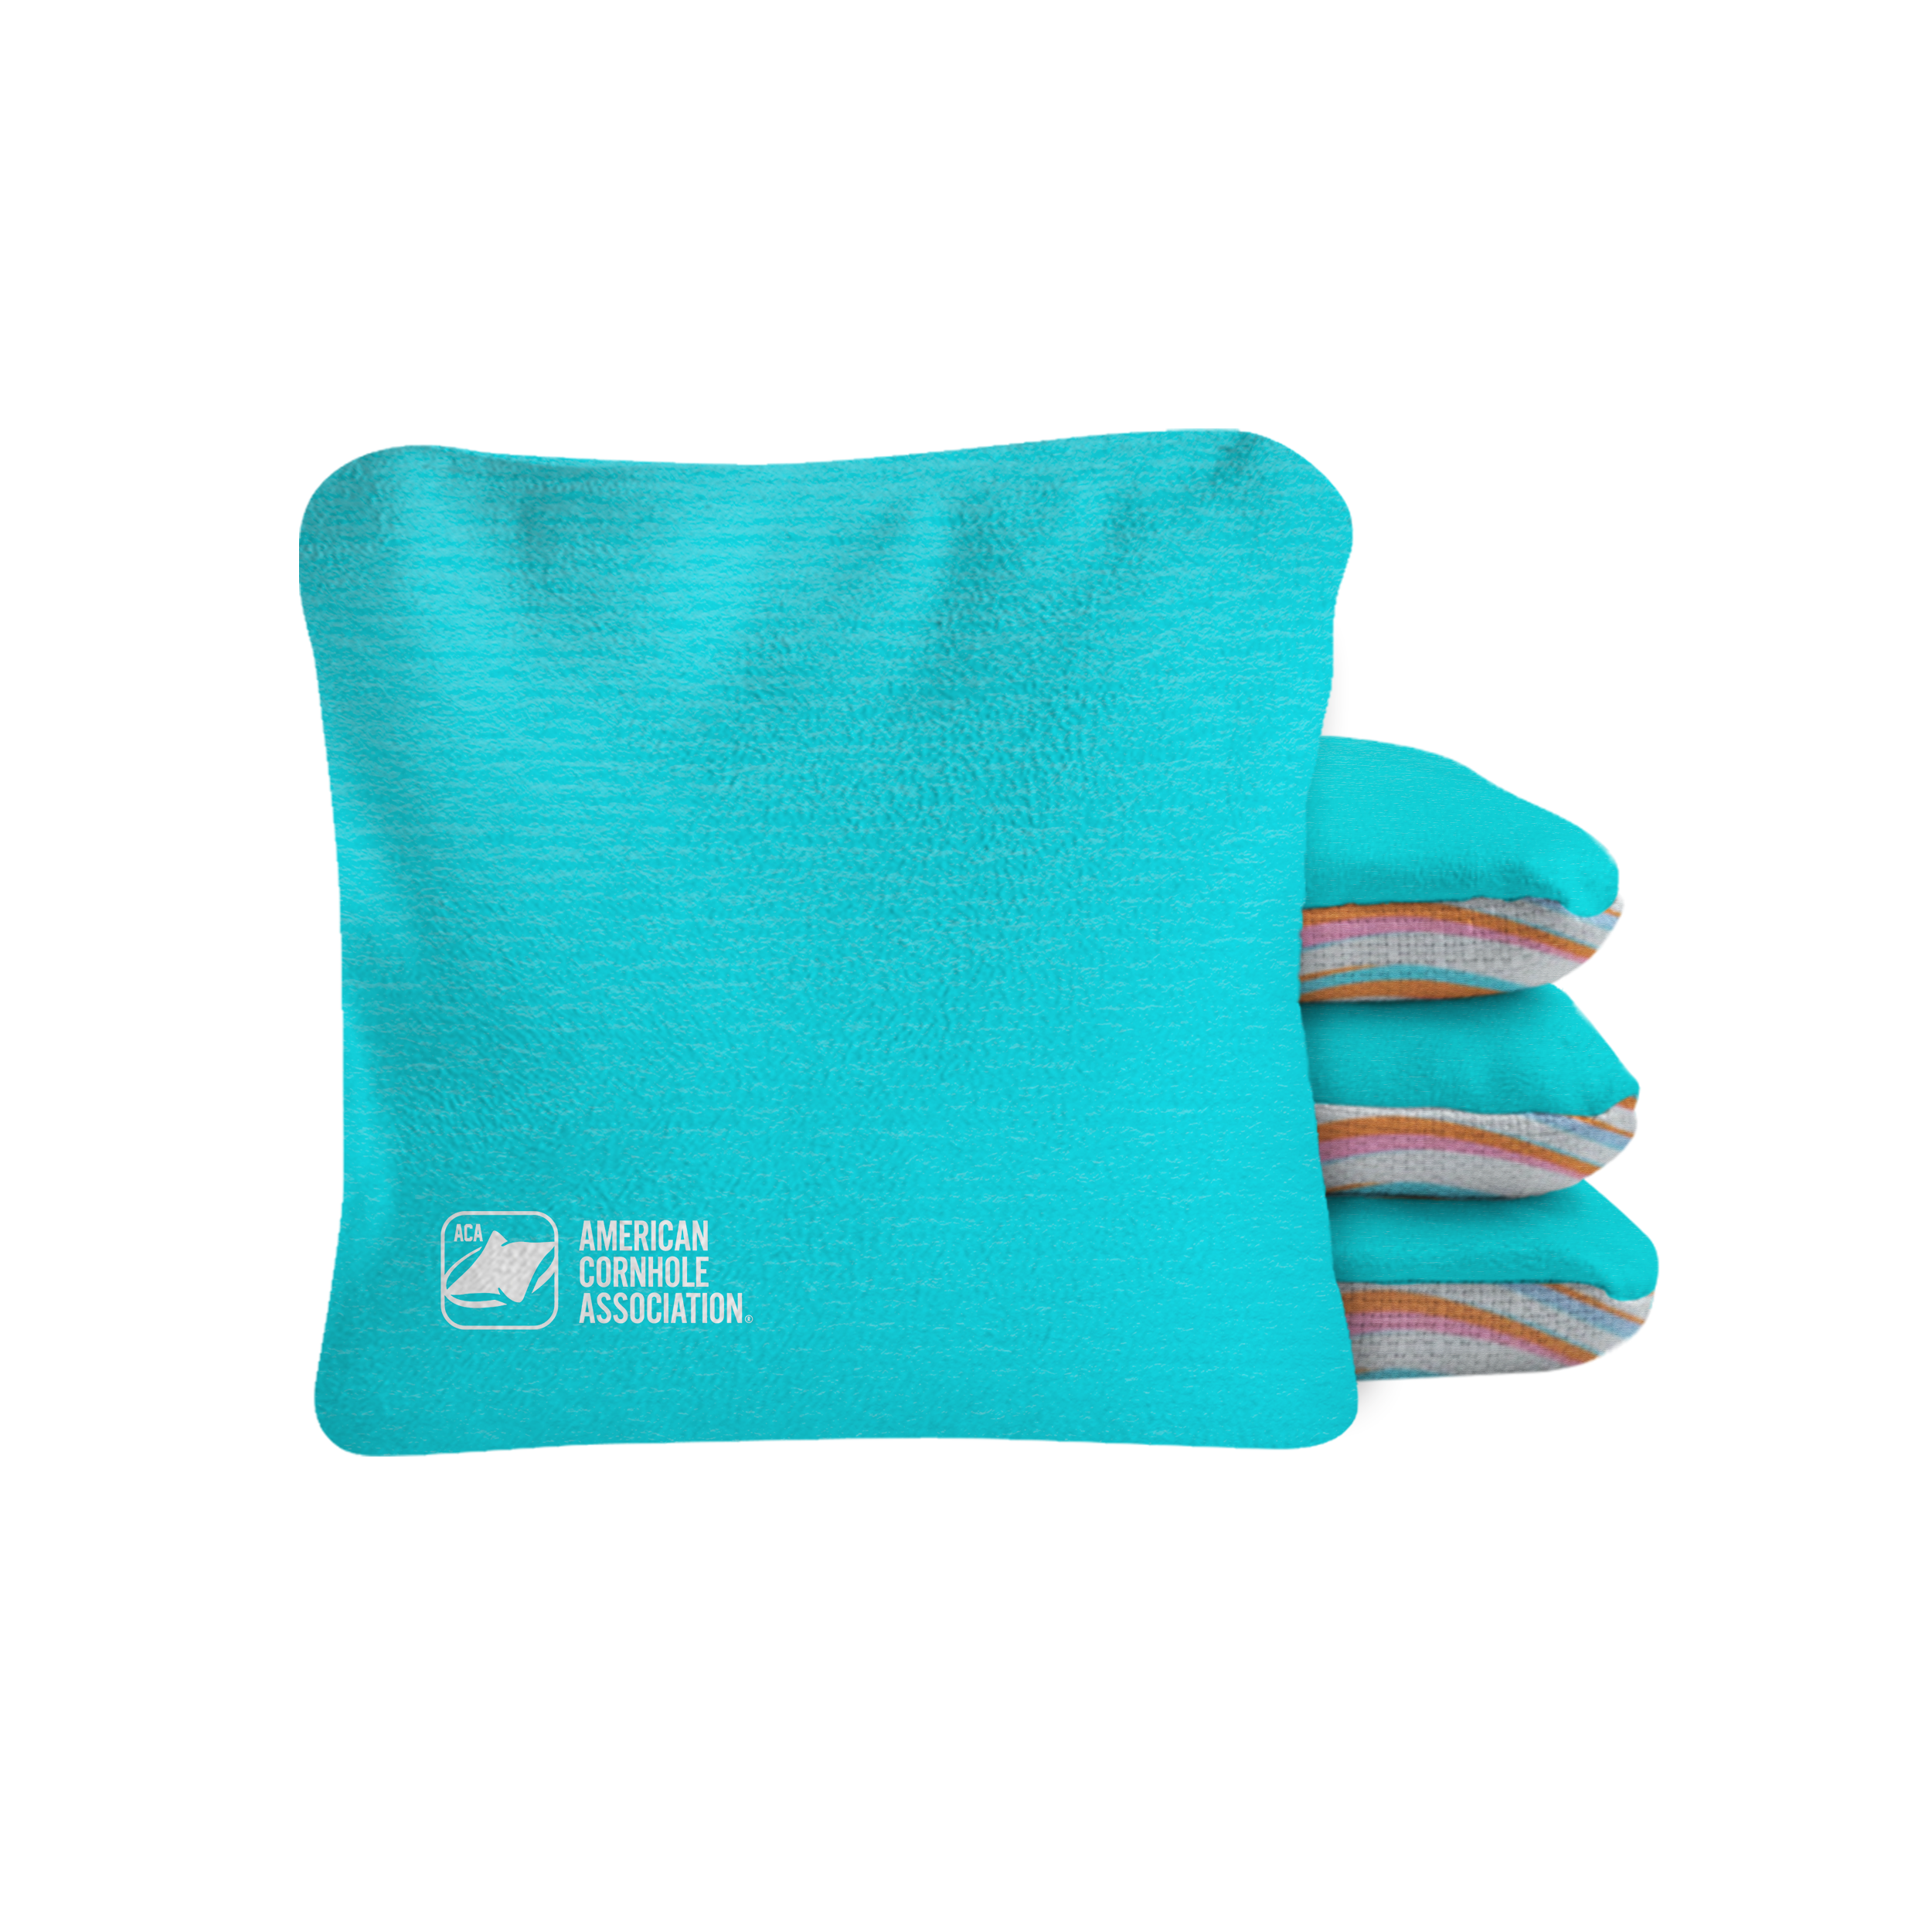 6-in Synergy Pro Teal with Waves Professional Regulation Cornhole Bags